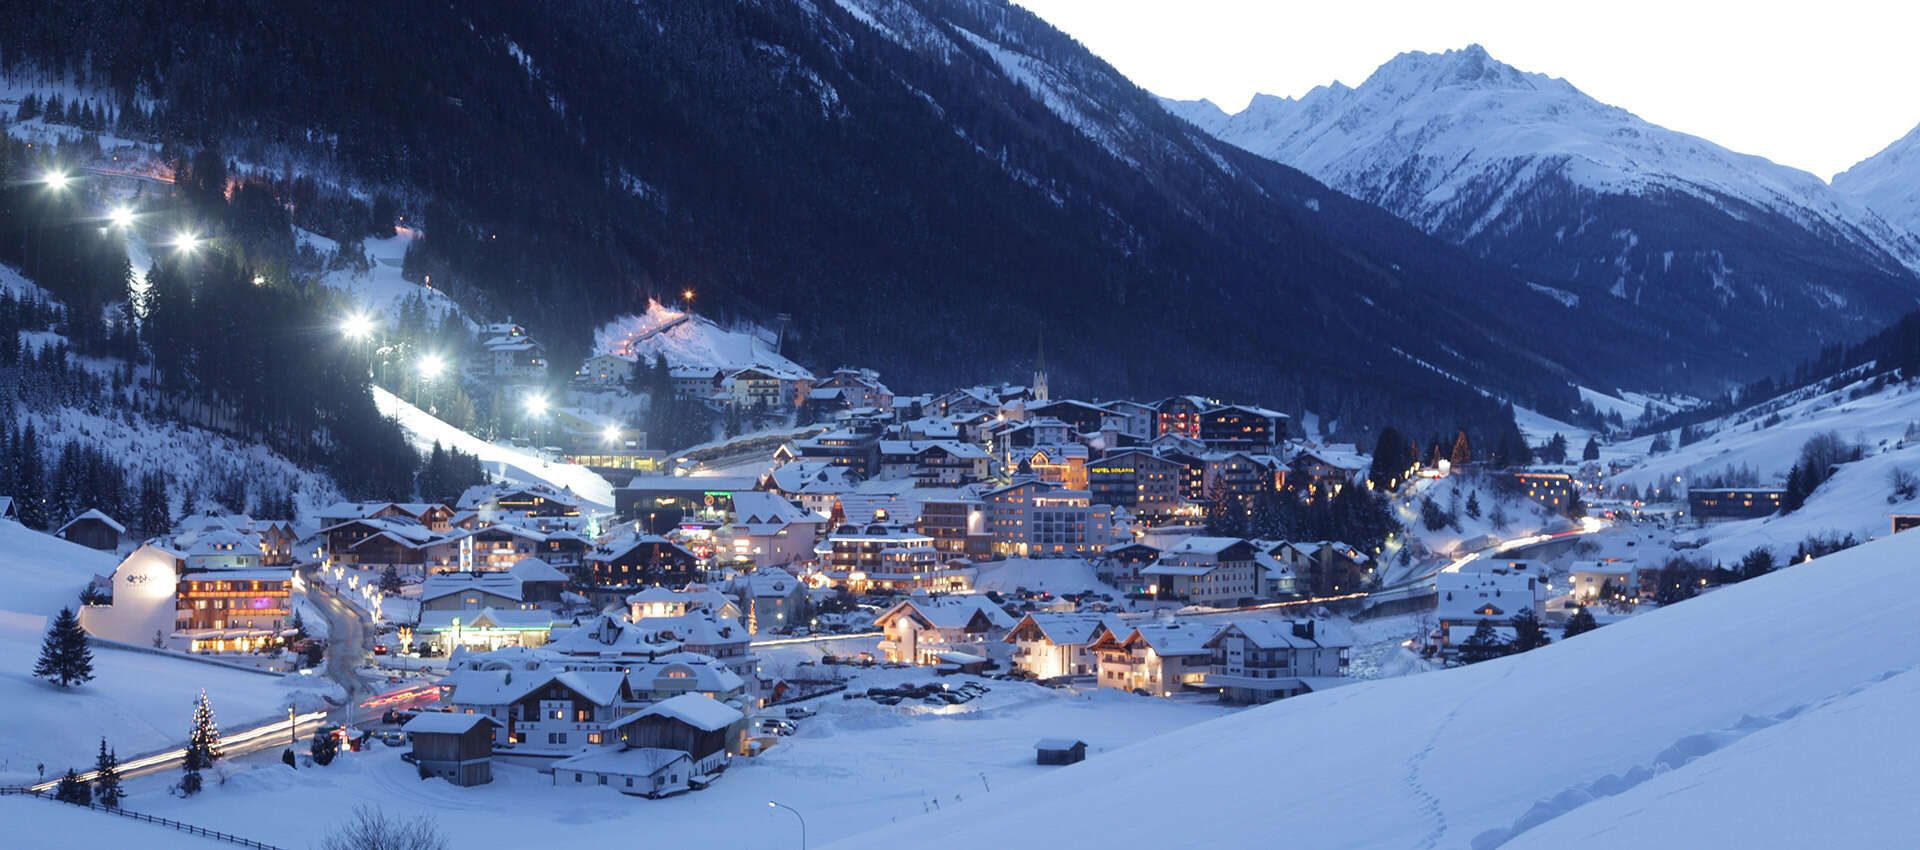 View of the town of Ischgl in winter at dusk